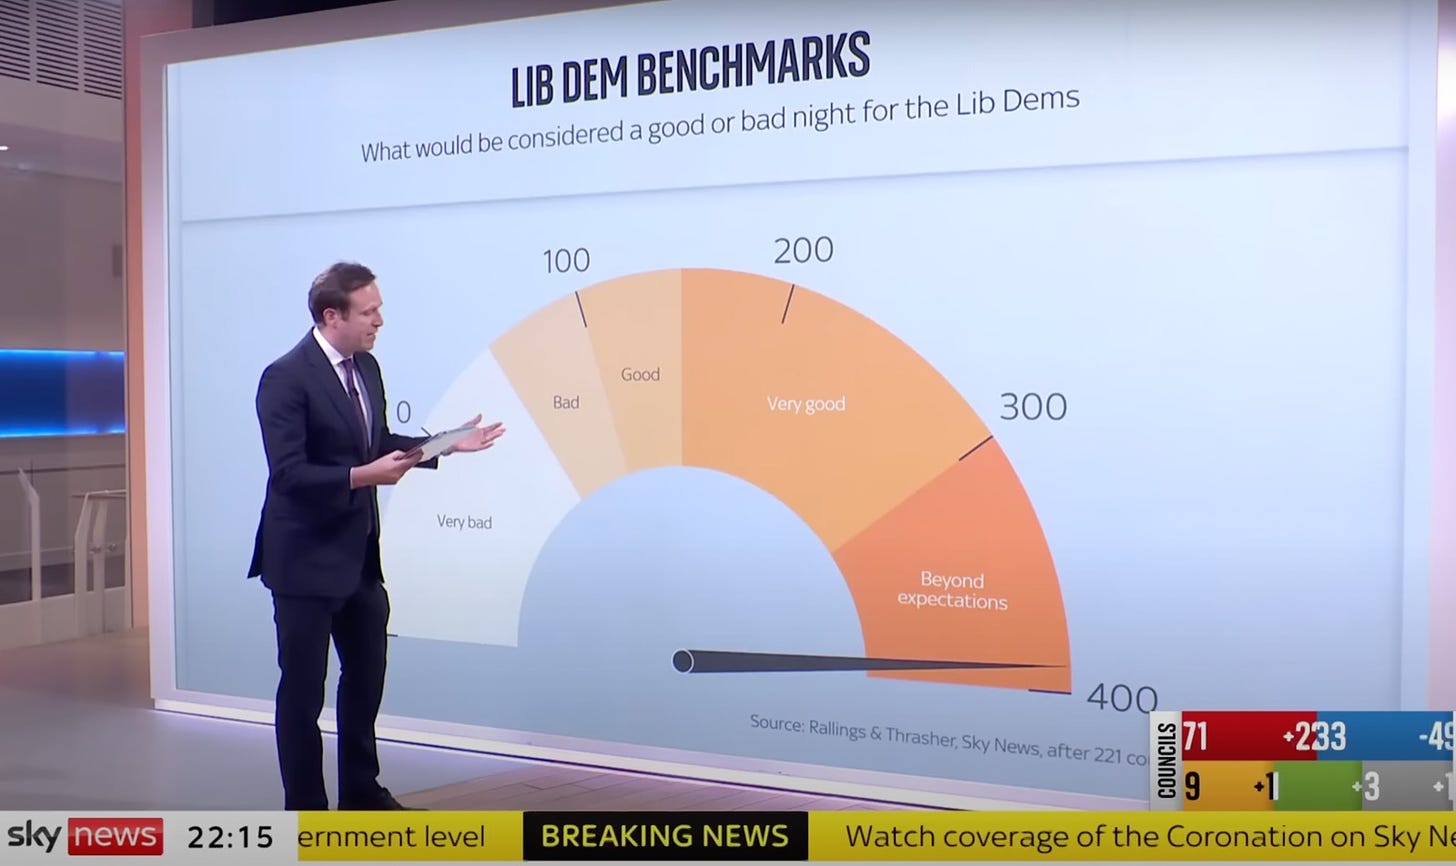 Lib Dem results swingometer on Sky News doesn't go high enough to track all the Lib Dem gains